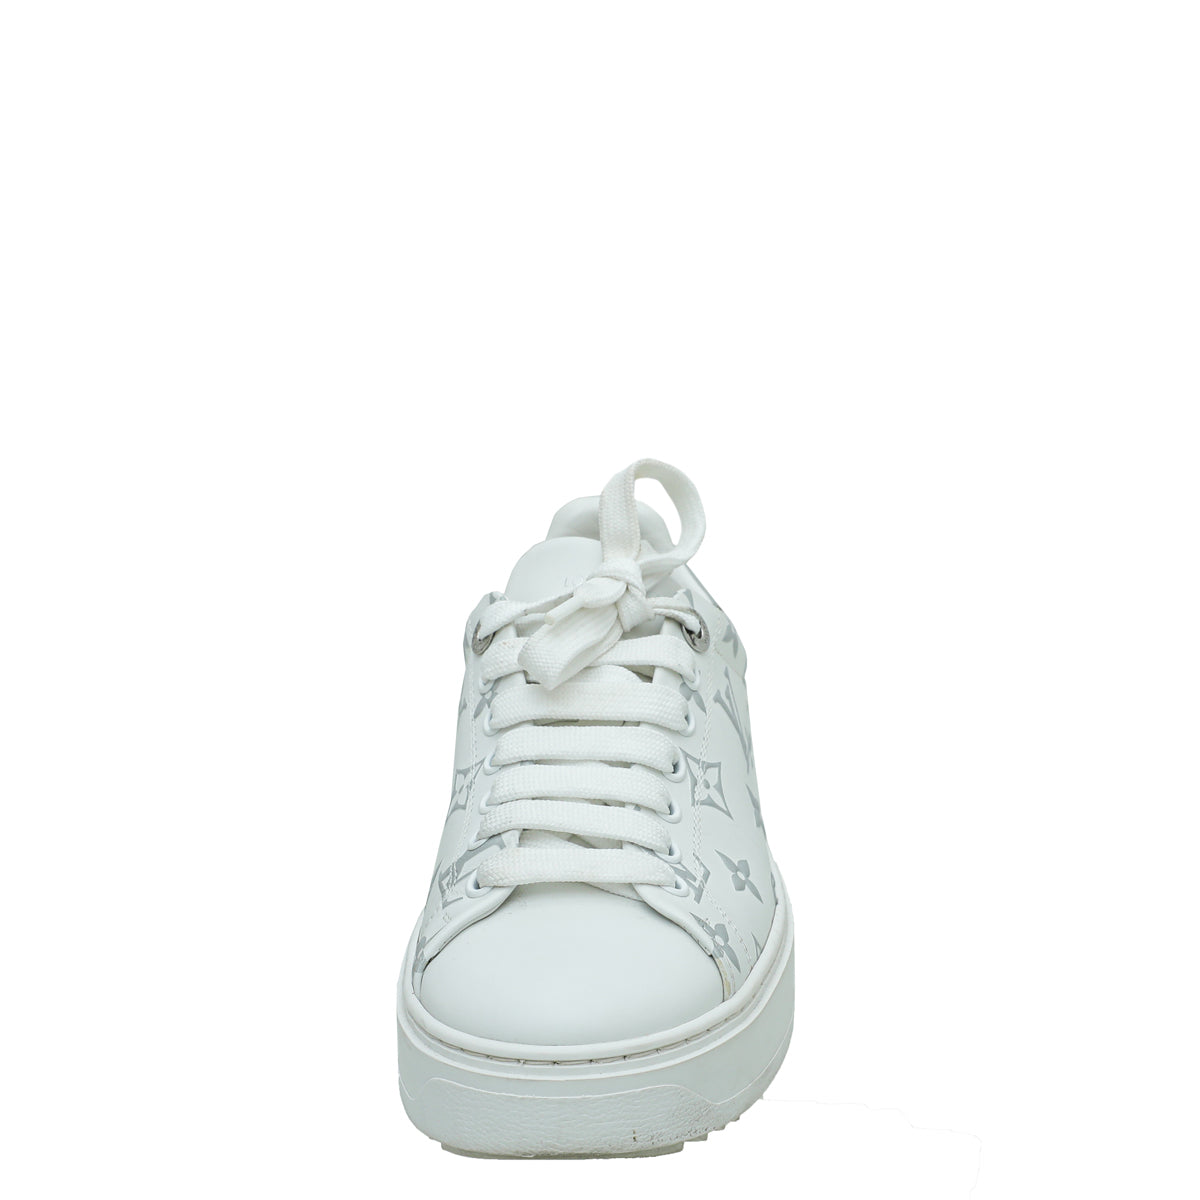 Shop Louis Vuitton Time out sneaker (TIME OUT SNEAKER, 1AAOSR 1AAOST 1AAOSV  1AAOSW, 1AAOSH 1AAOSJ 1AAOSL 1AAOSN 1AAOSP) by Mikrie